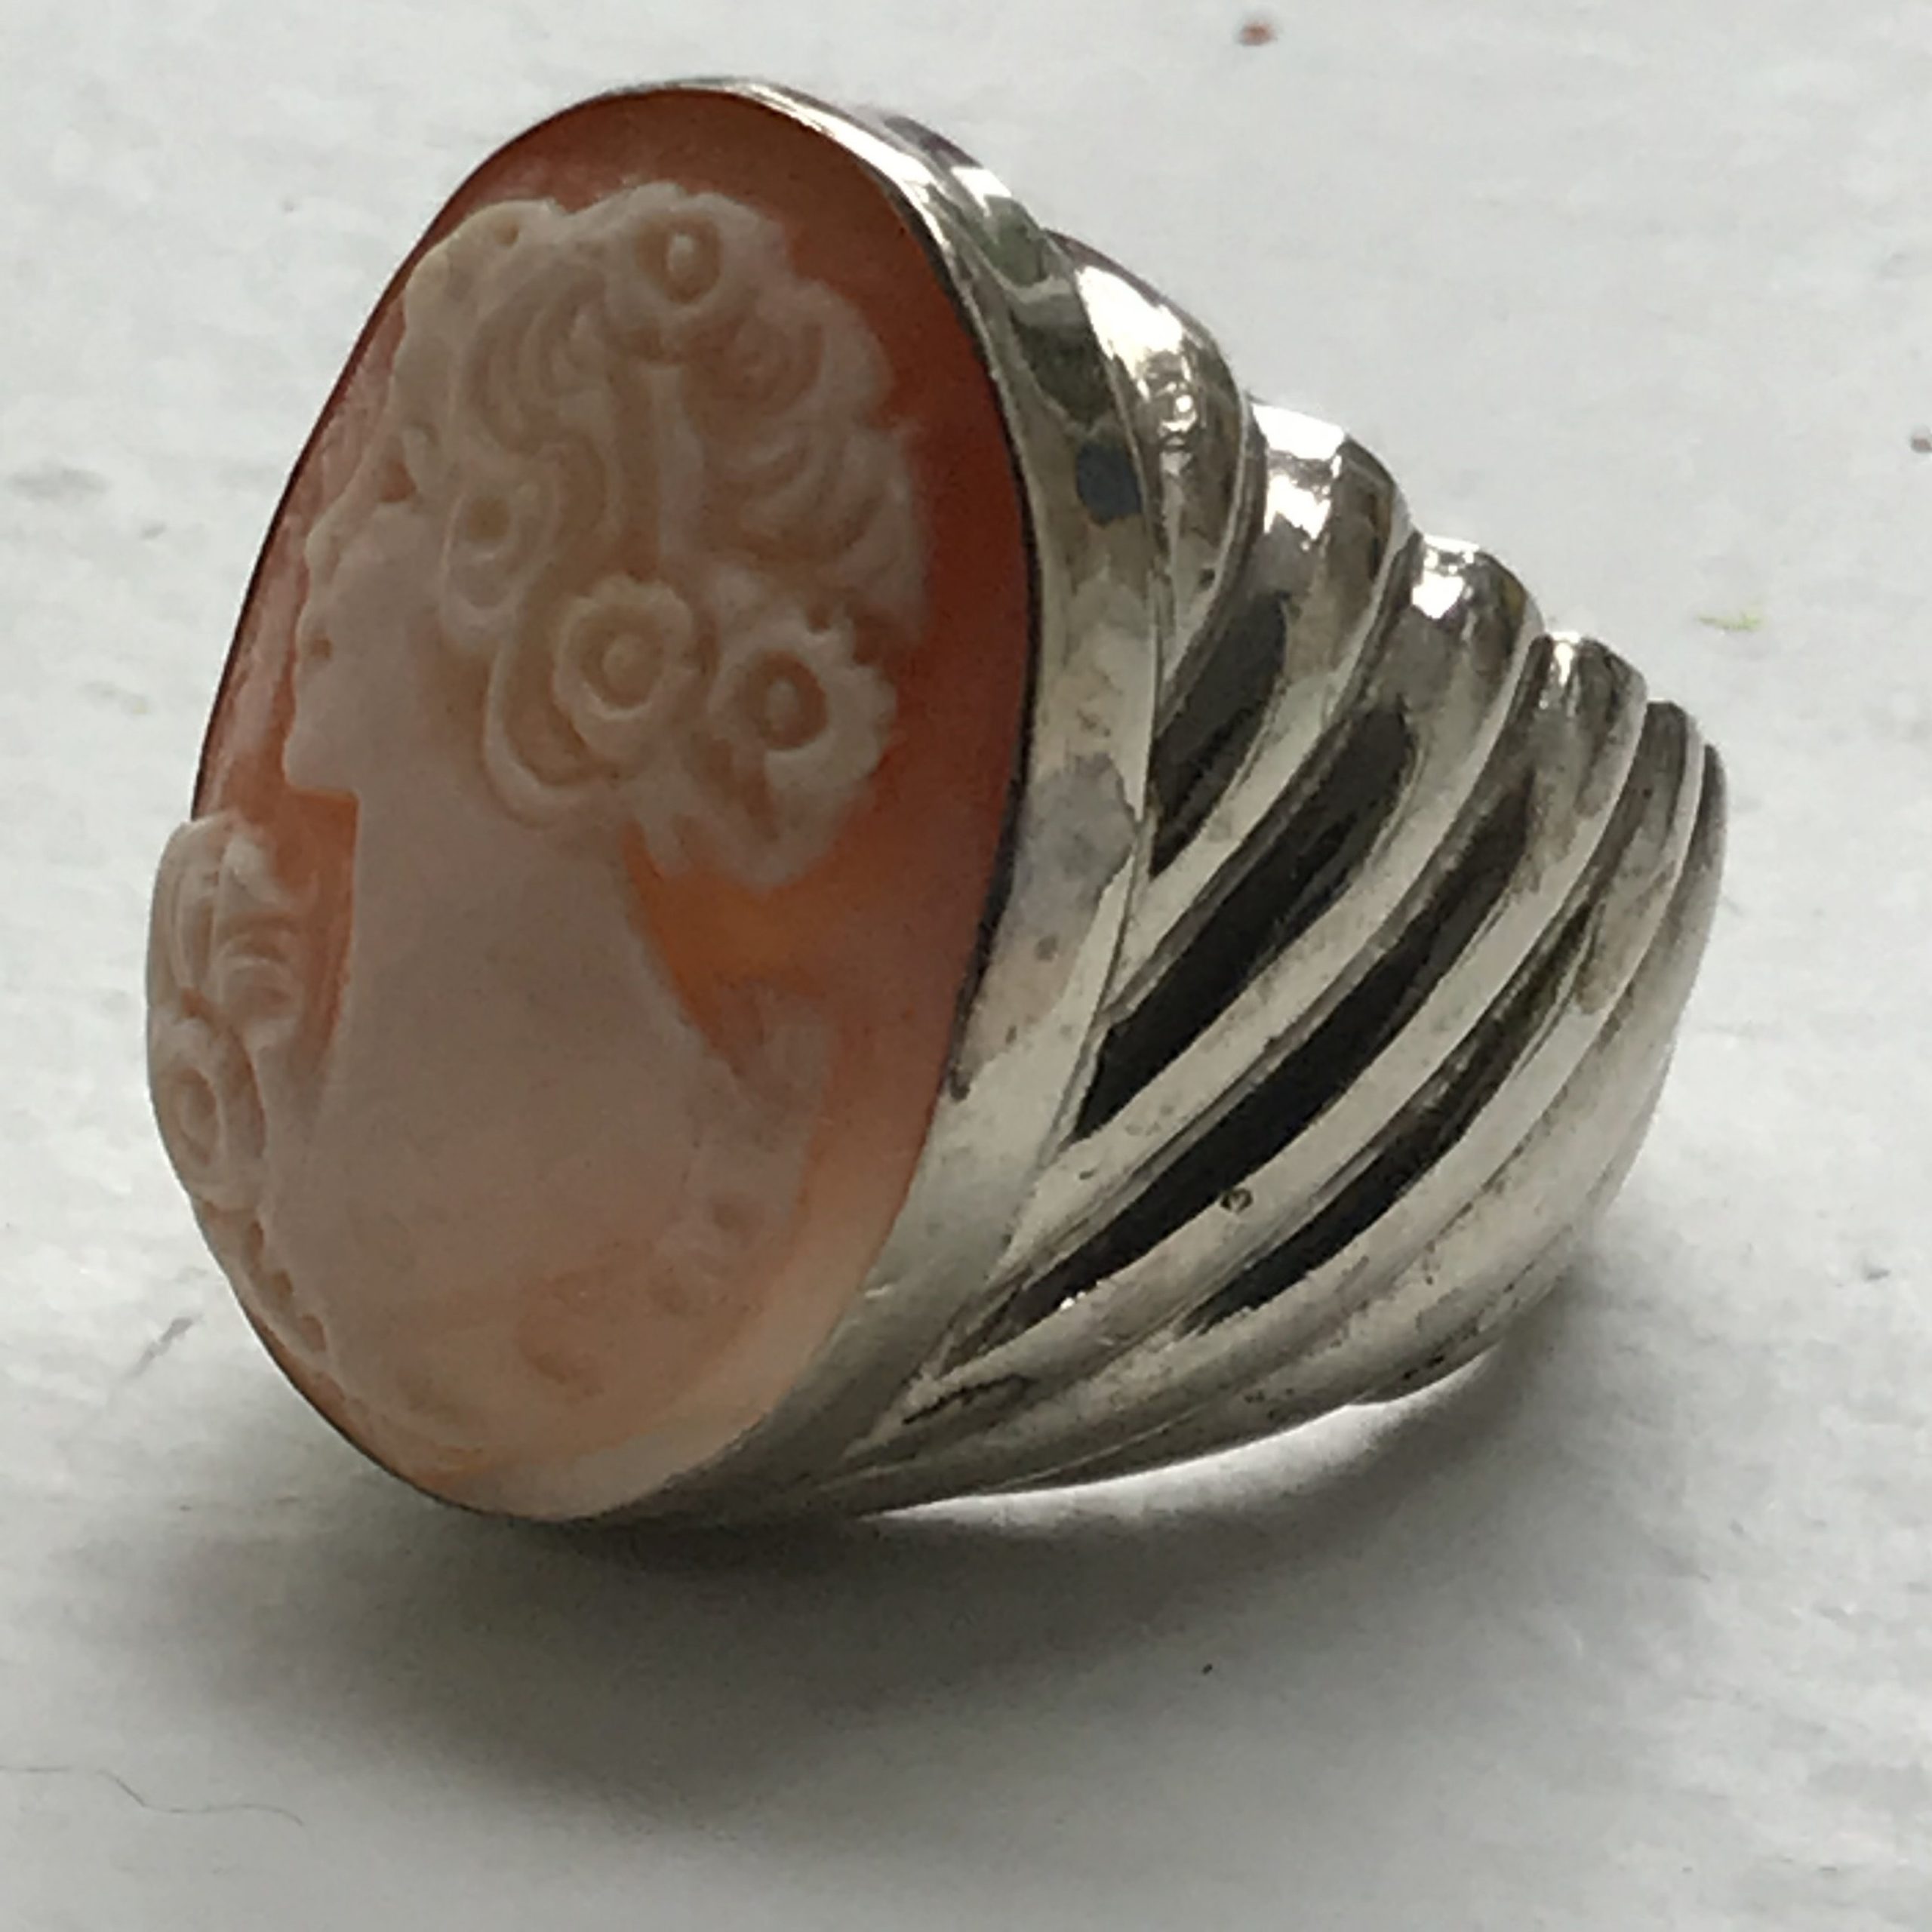 vintage cameo ring set in sterling silver size 7 swirl raised sides hand carved portrait from shell 5e05aeaf3 scaled